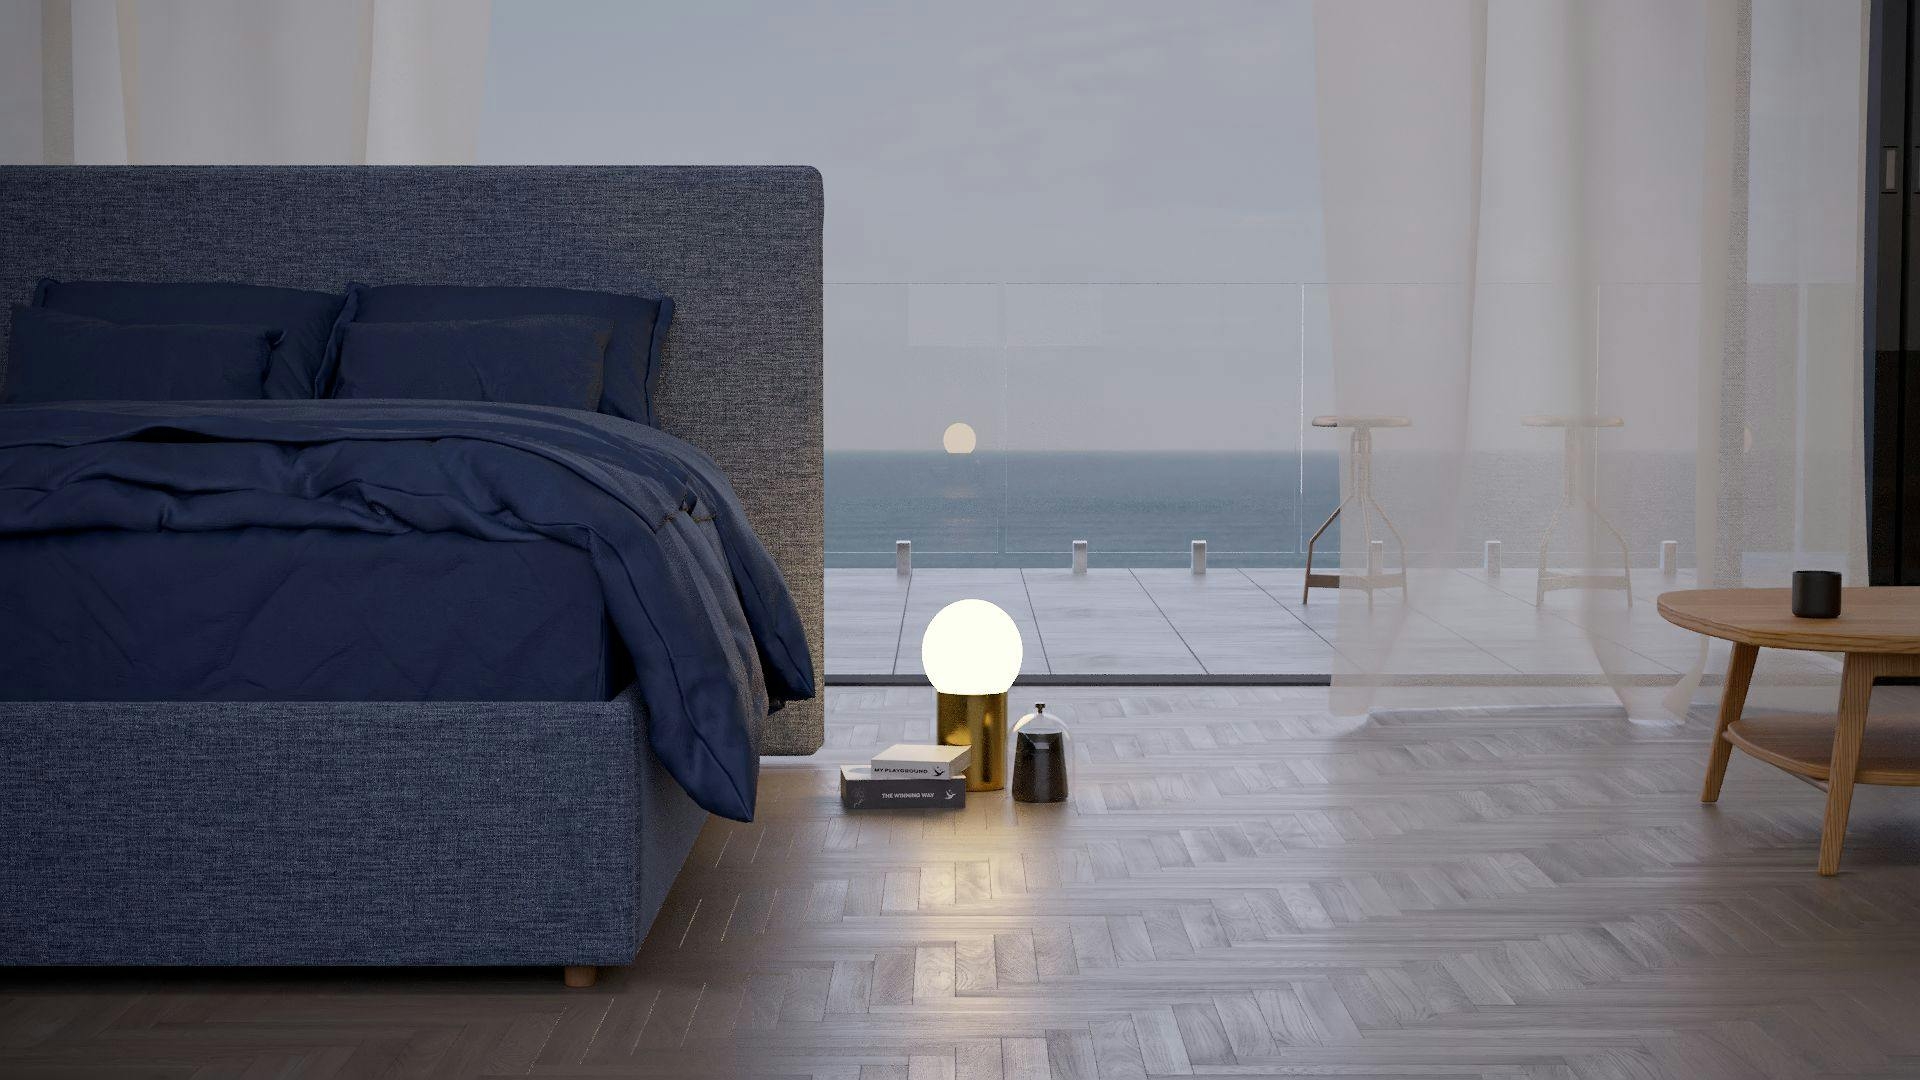 The Seaspray SD Indestruct Bed in Washed Navy, in a minimalist bedroom overlooking the ocean as the sun rises.